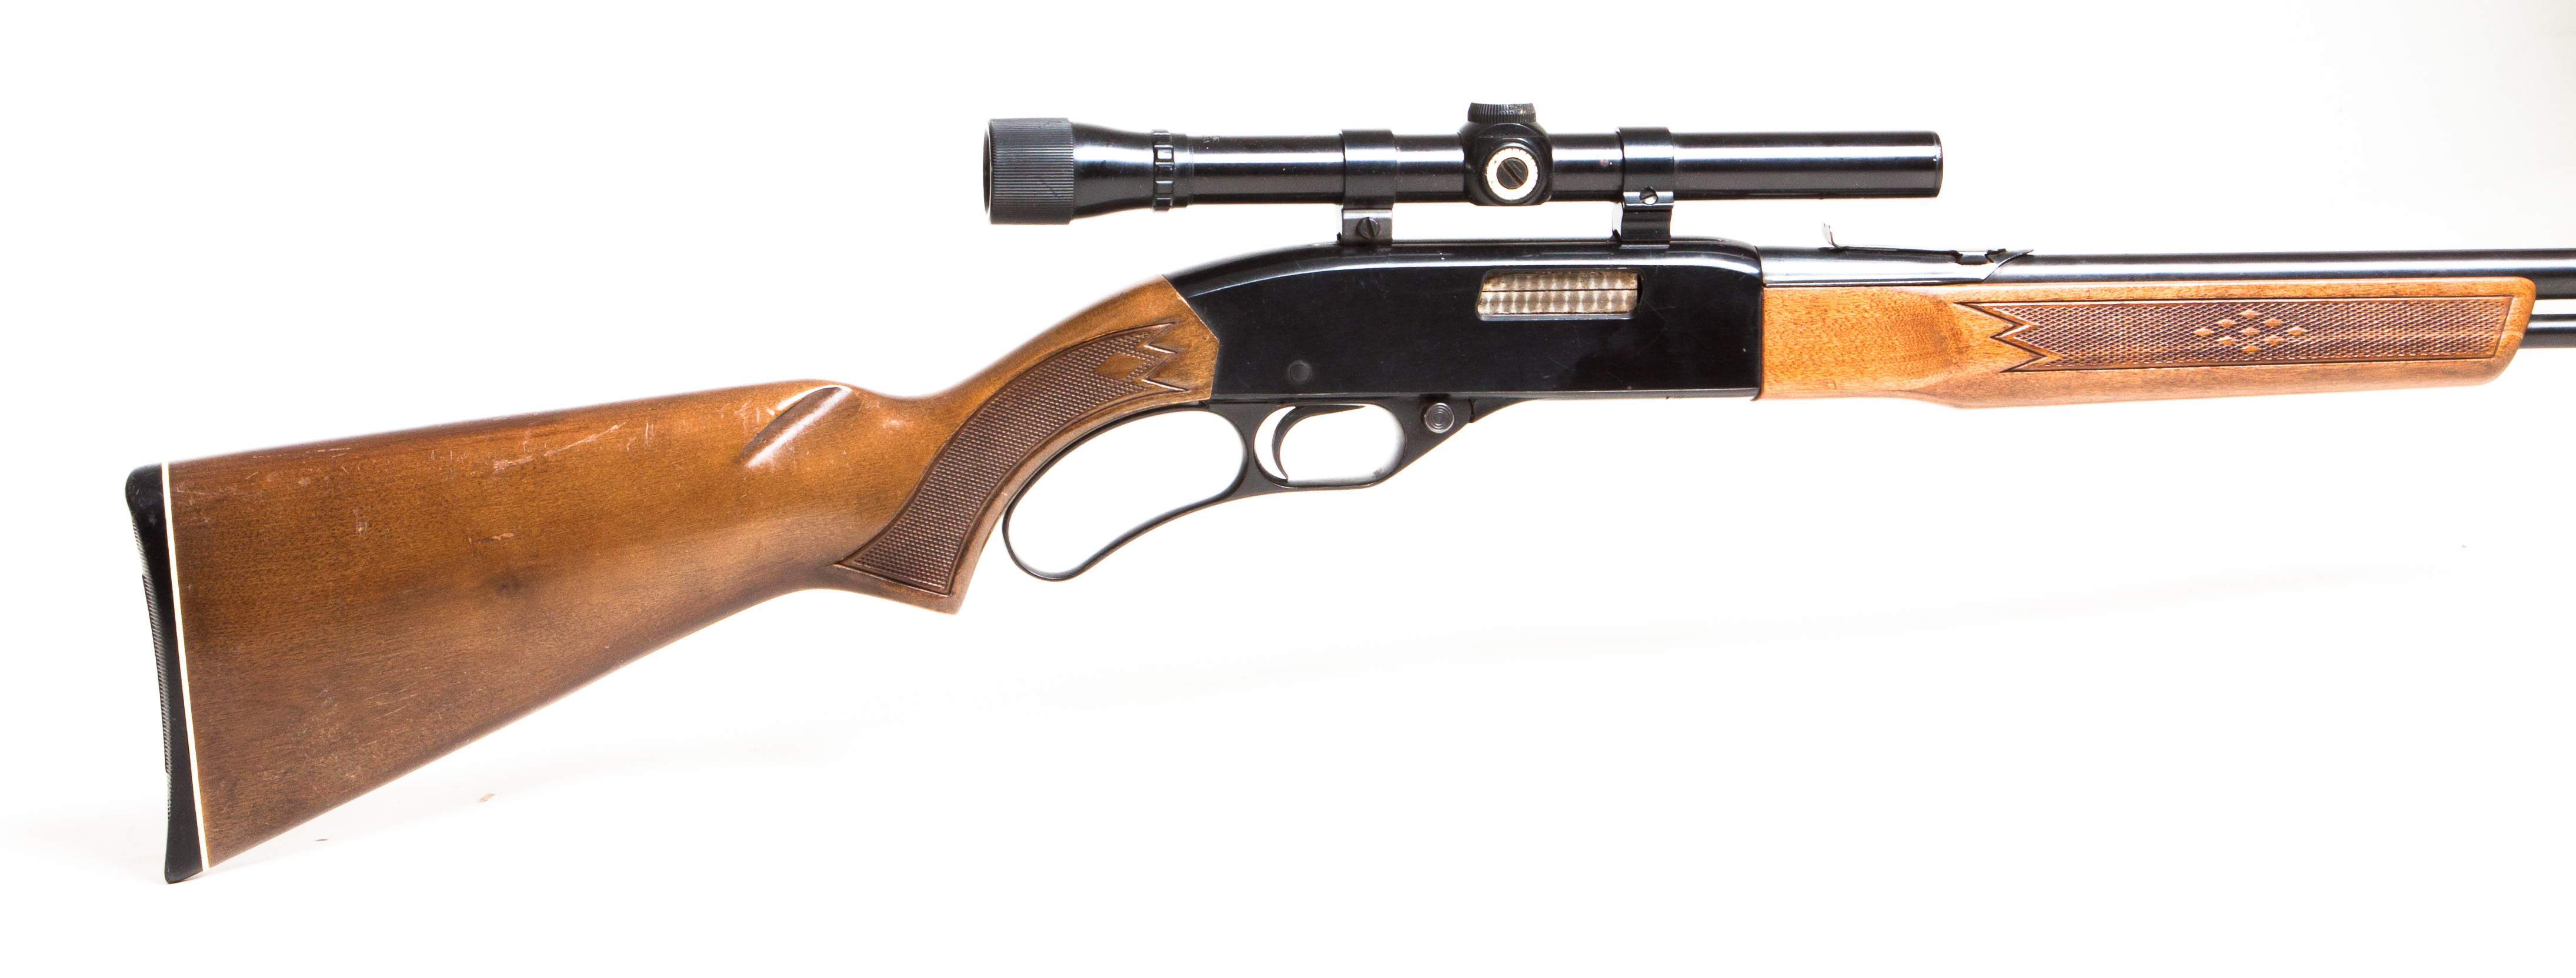 Winchester Rifle Model 250 | Cottone Auctions